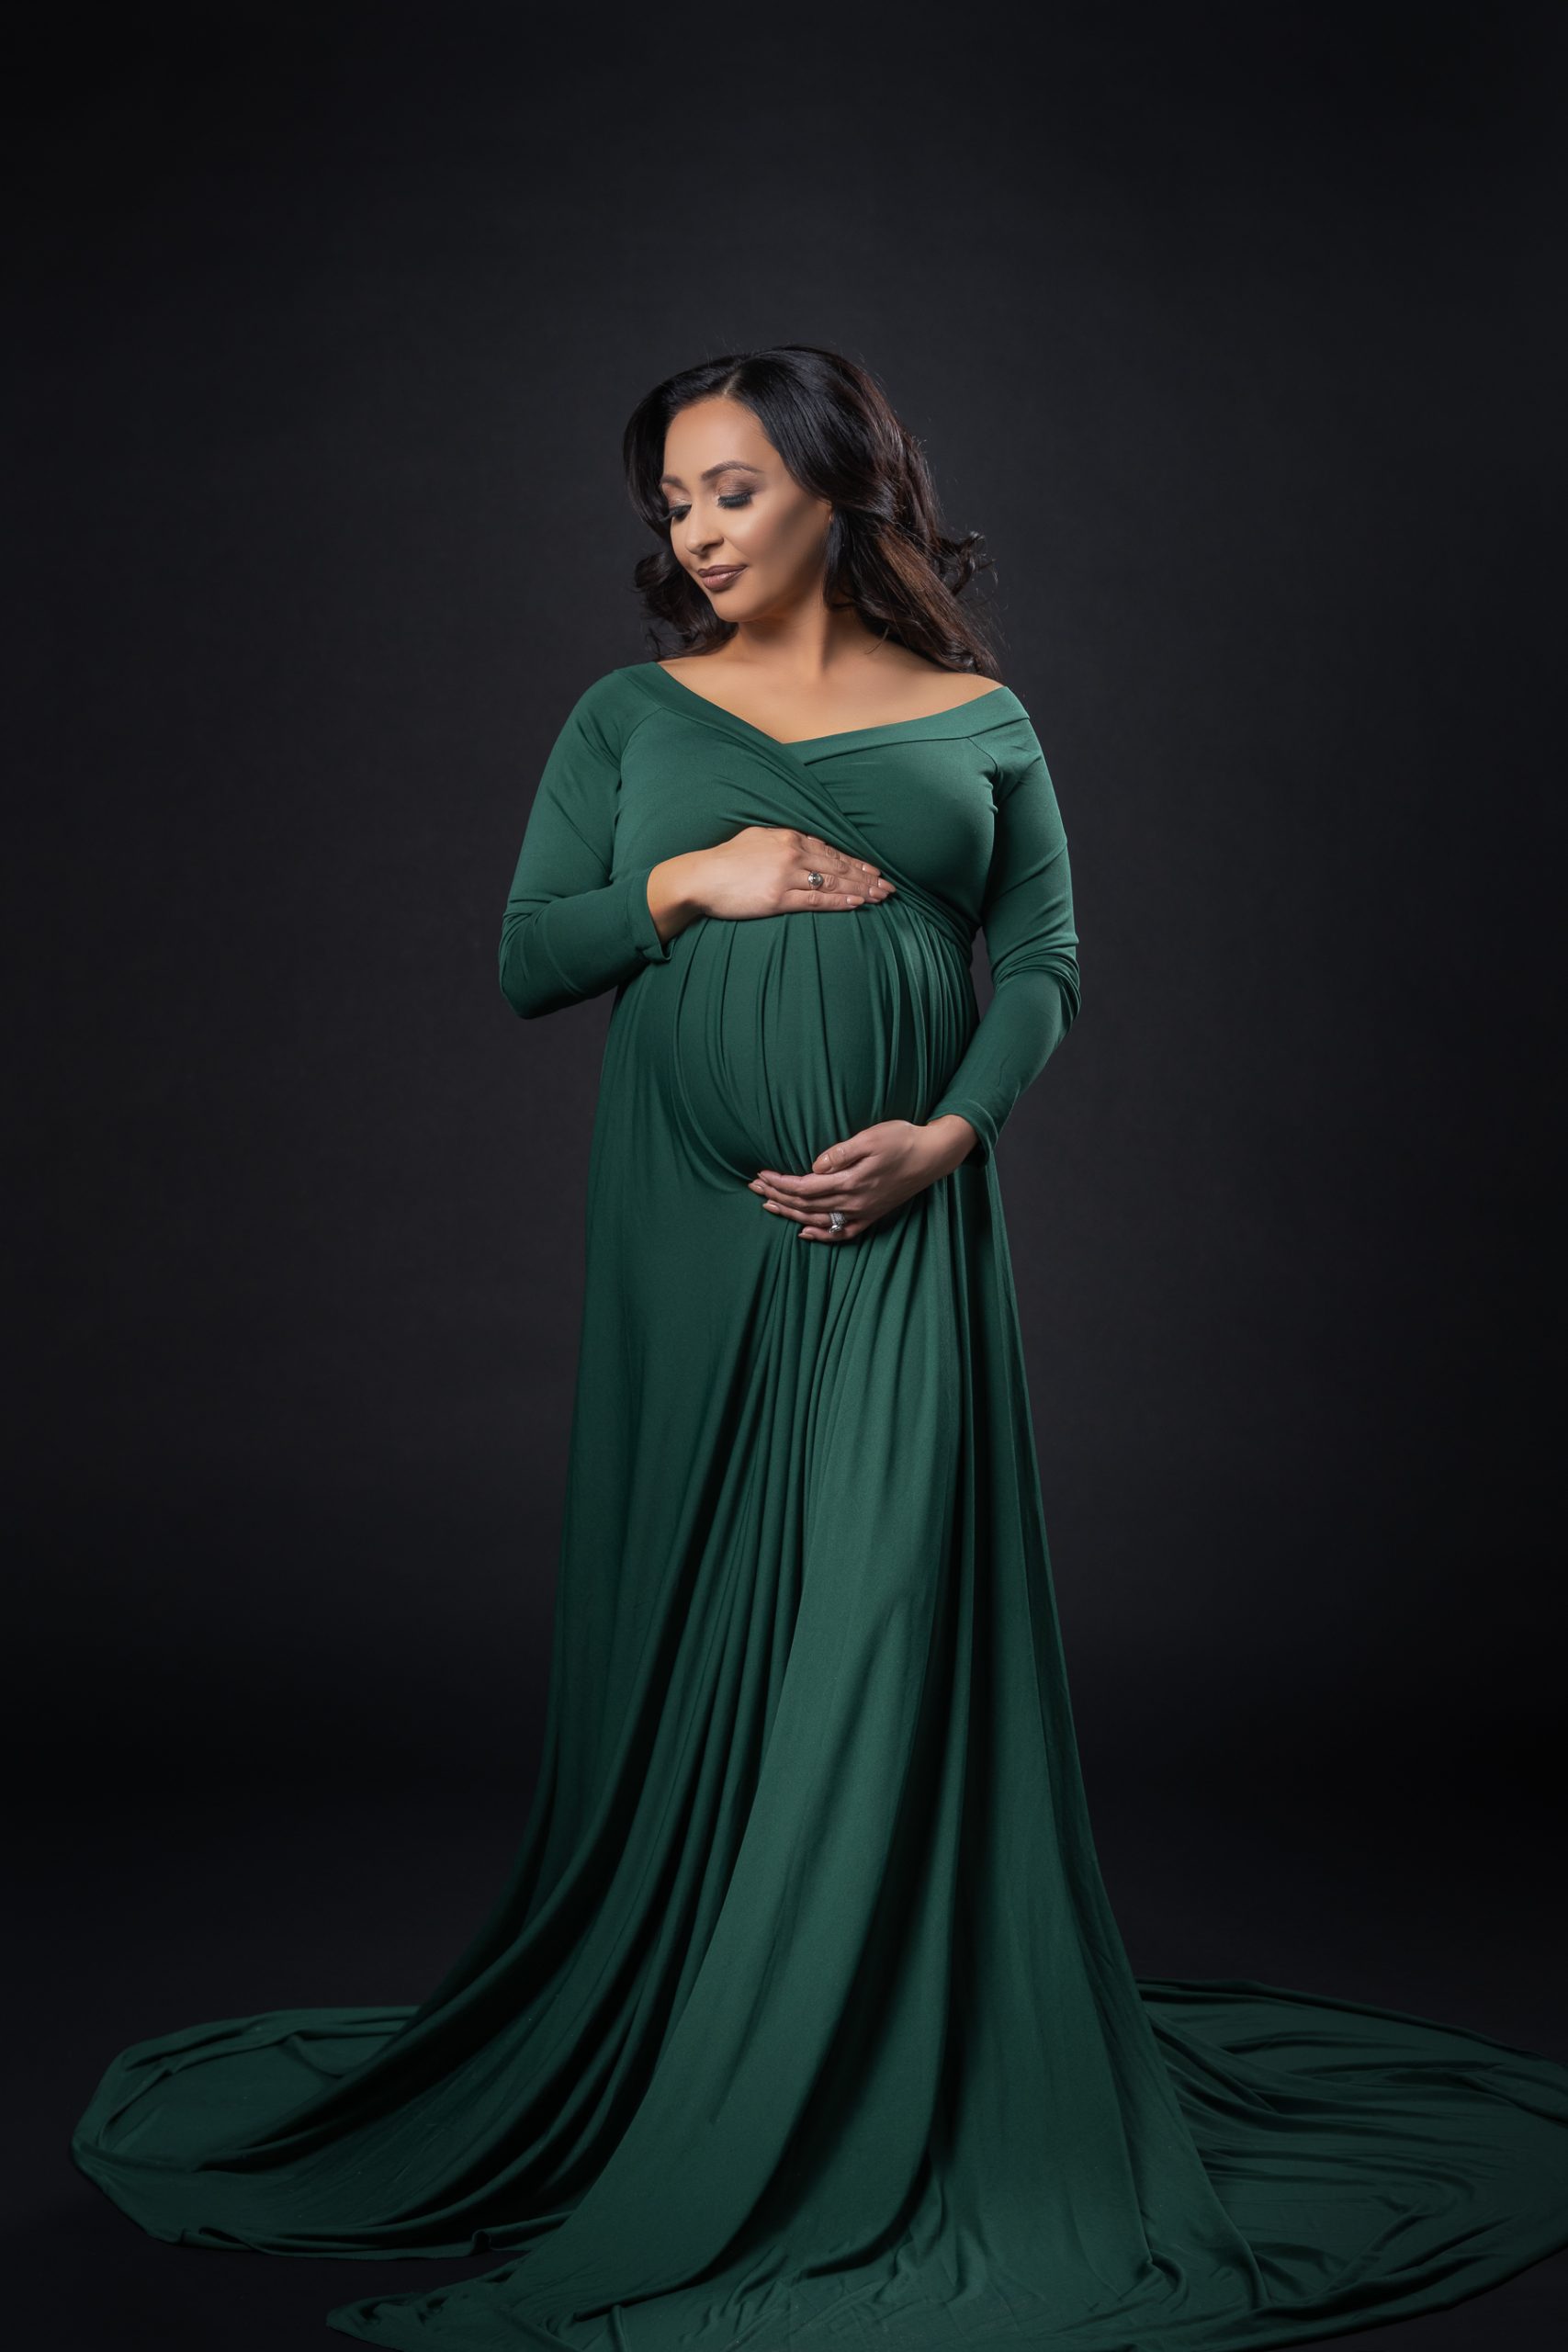 Maternity photography in green dress